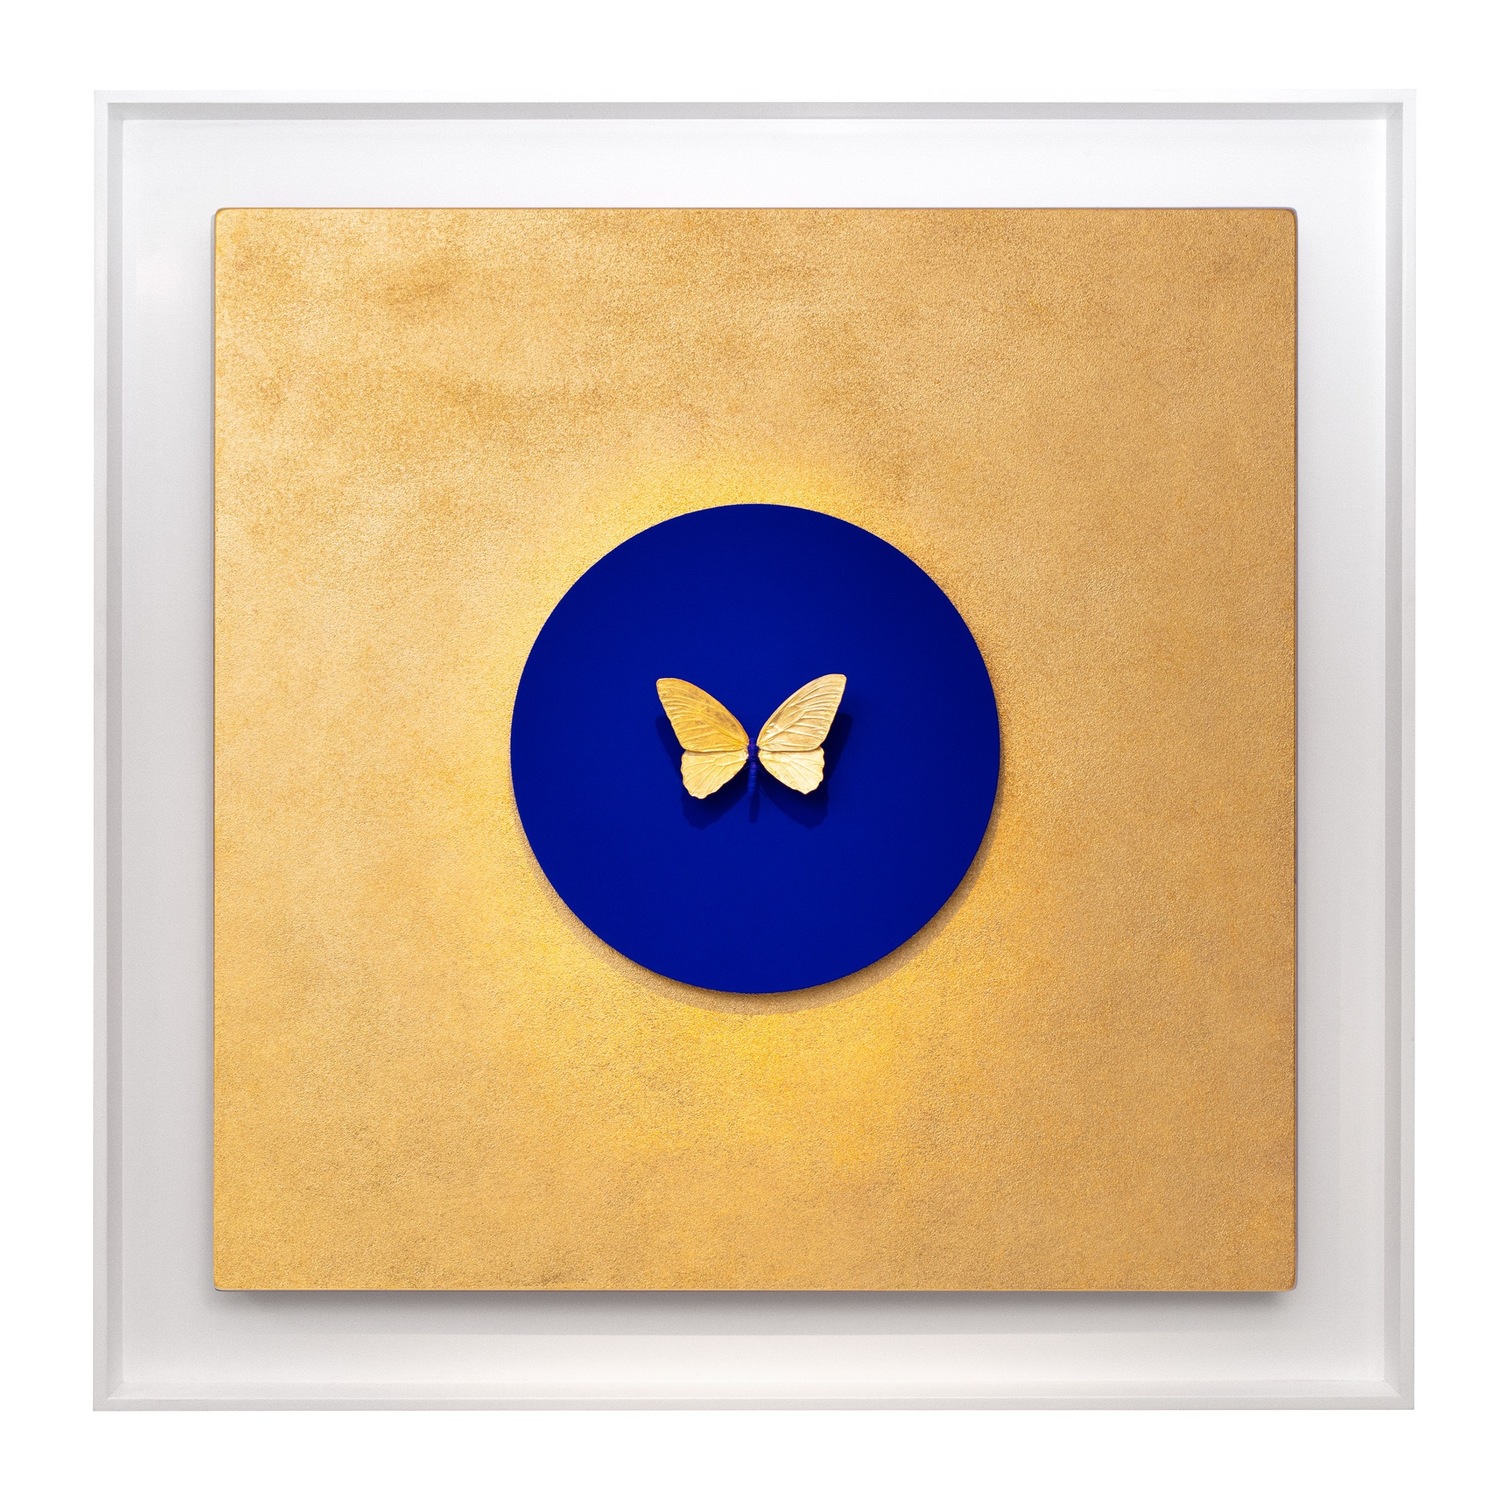 Inversion Blue on Gold III